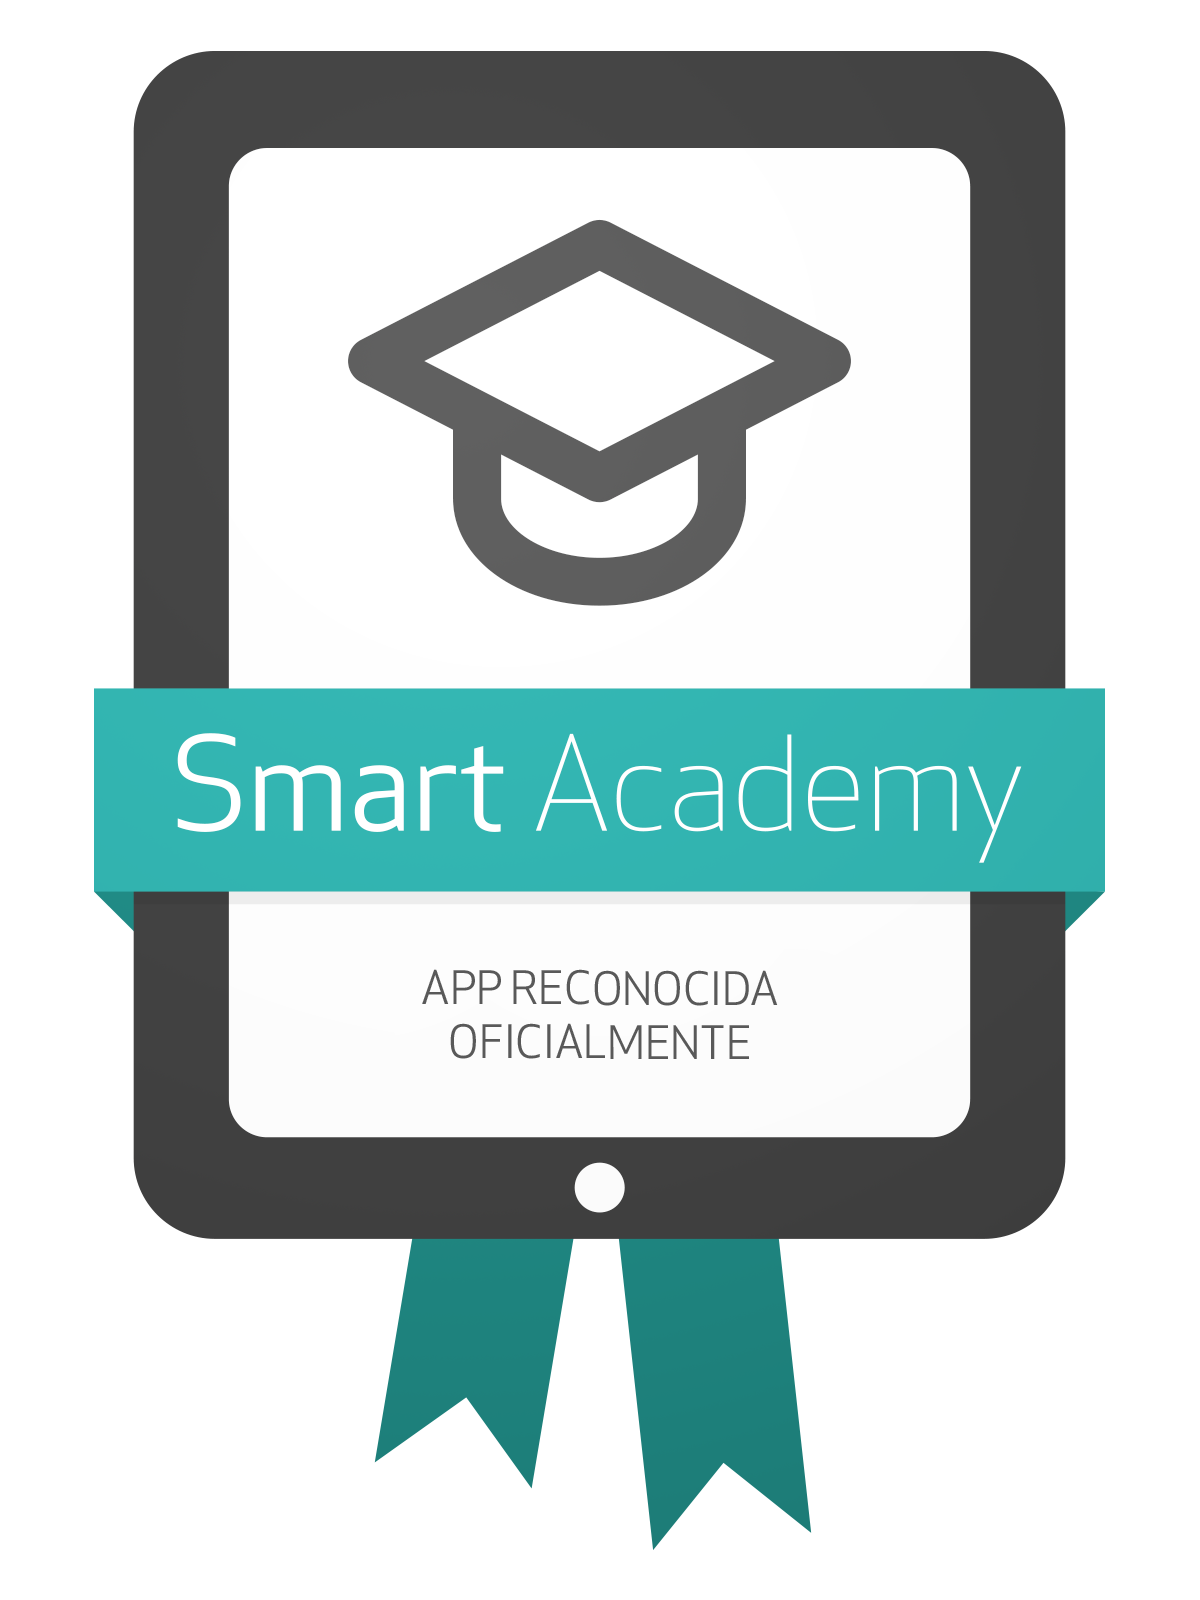 Lee Paso a Paso 2 also was included in Smart Academy education project